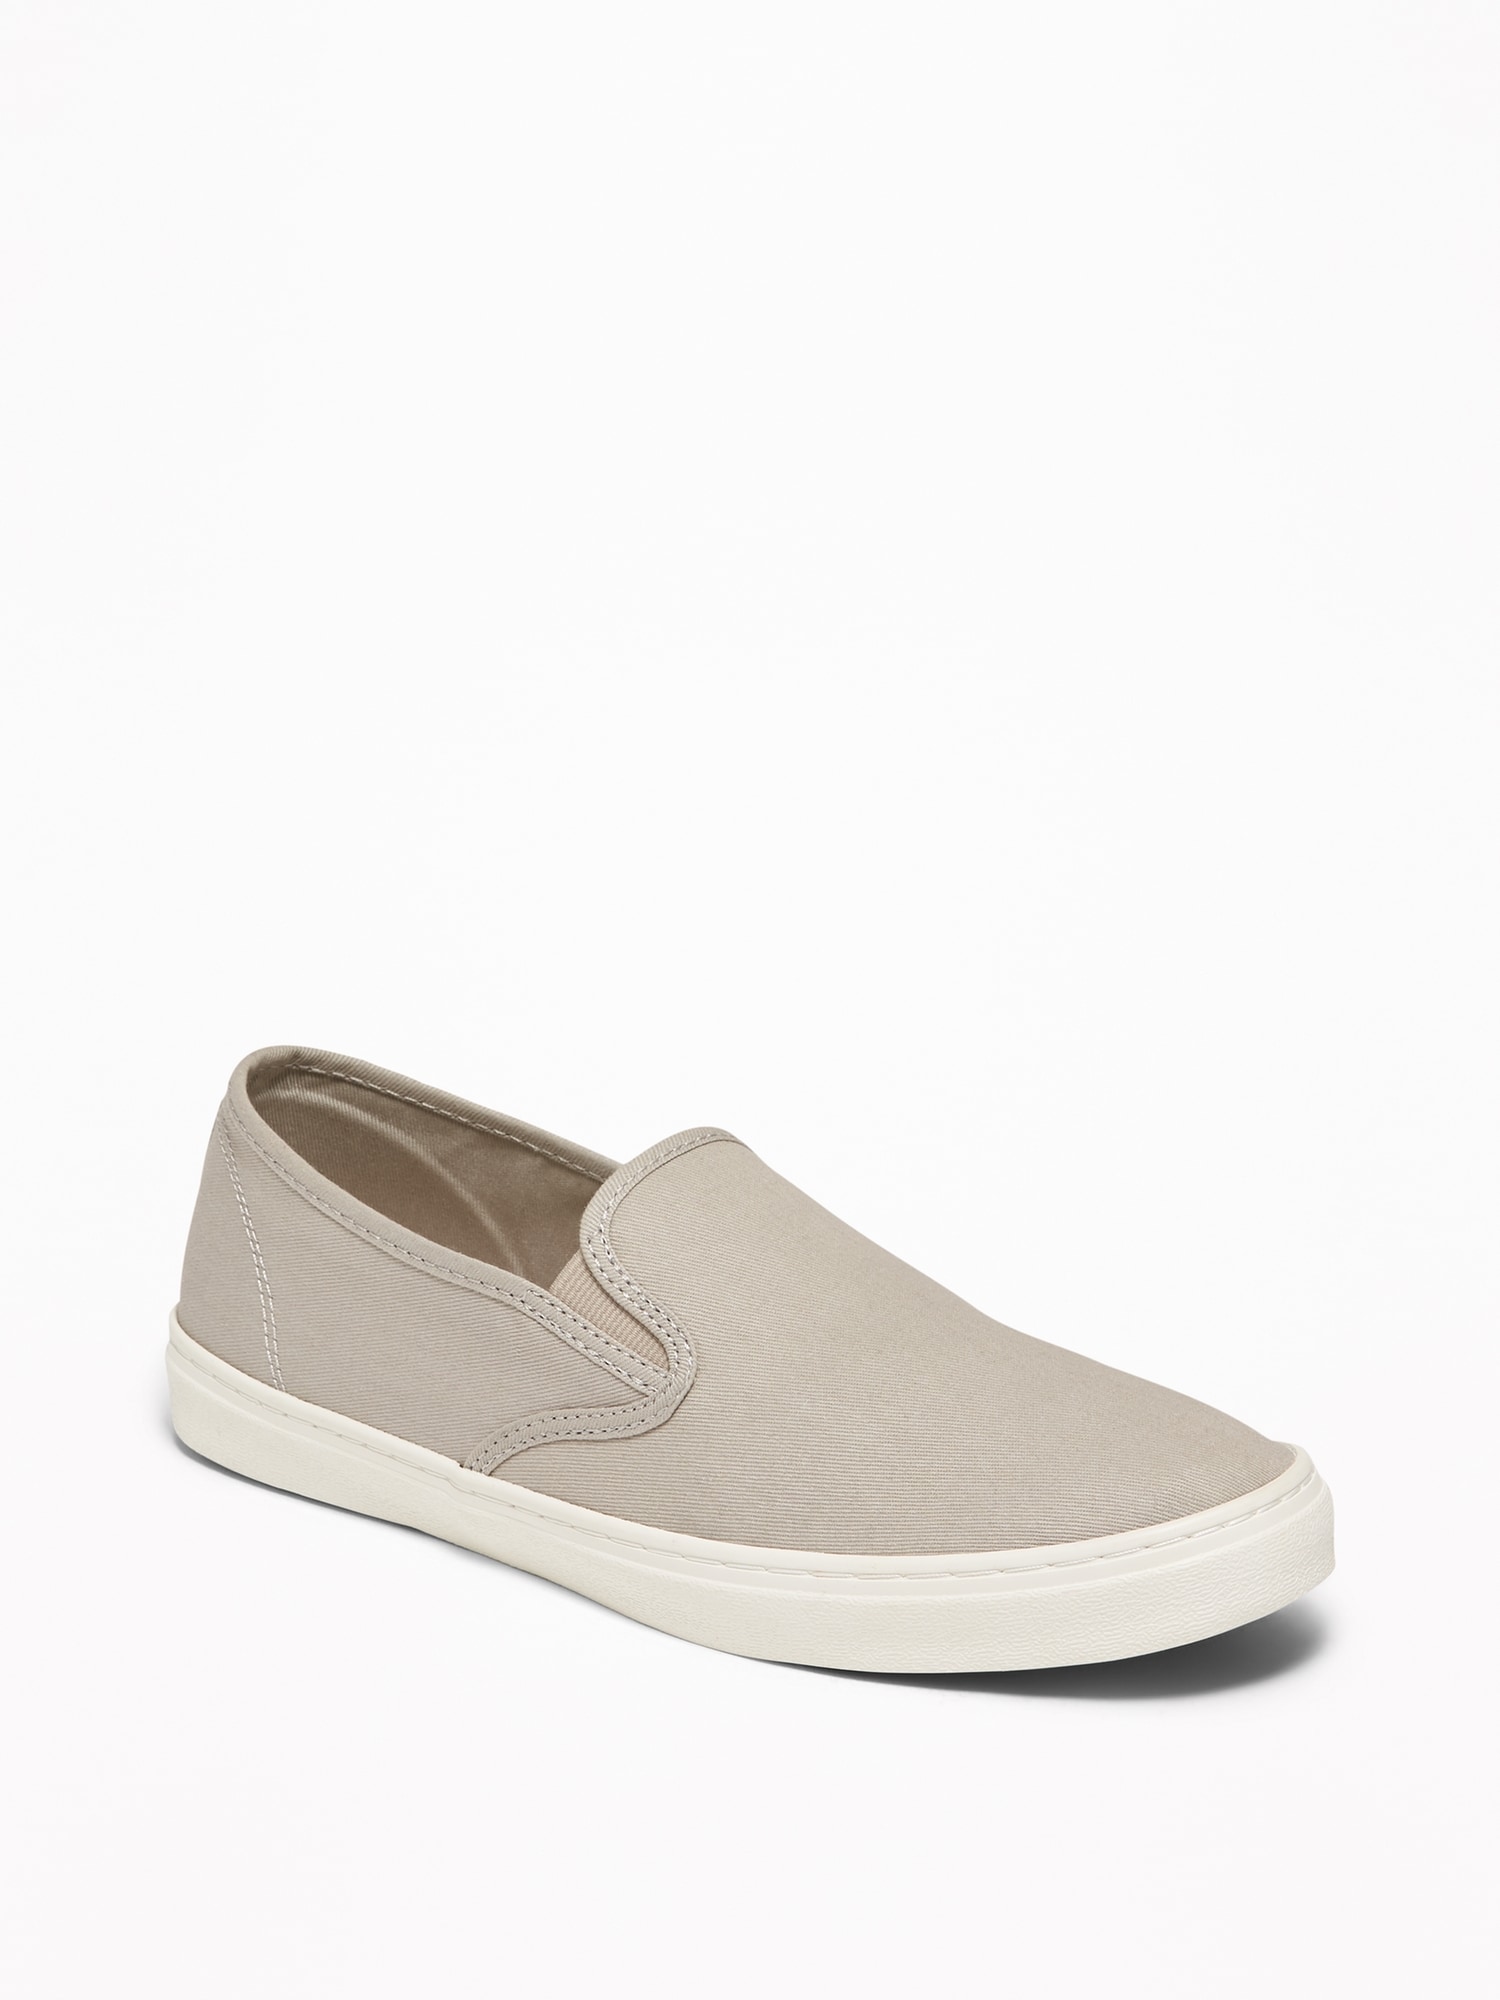 old navy canvas shoes